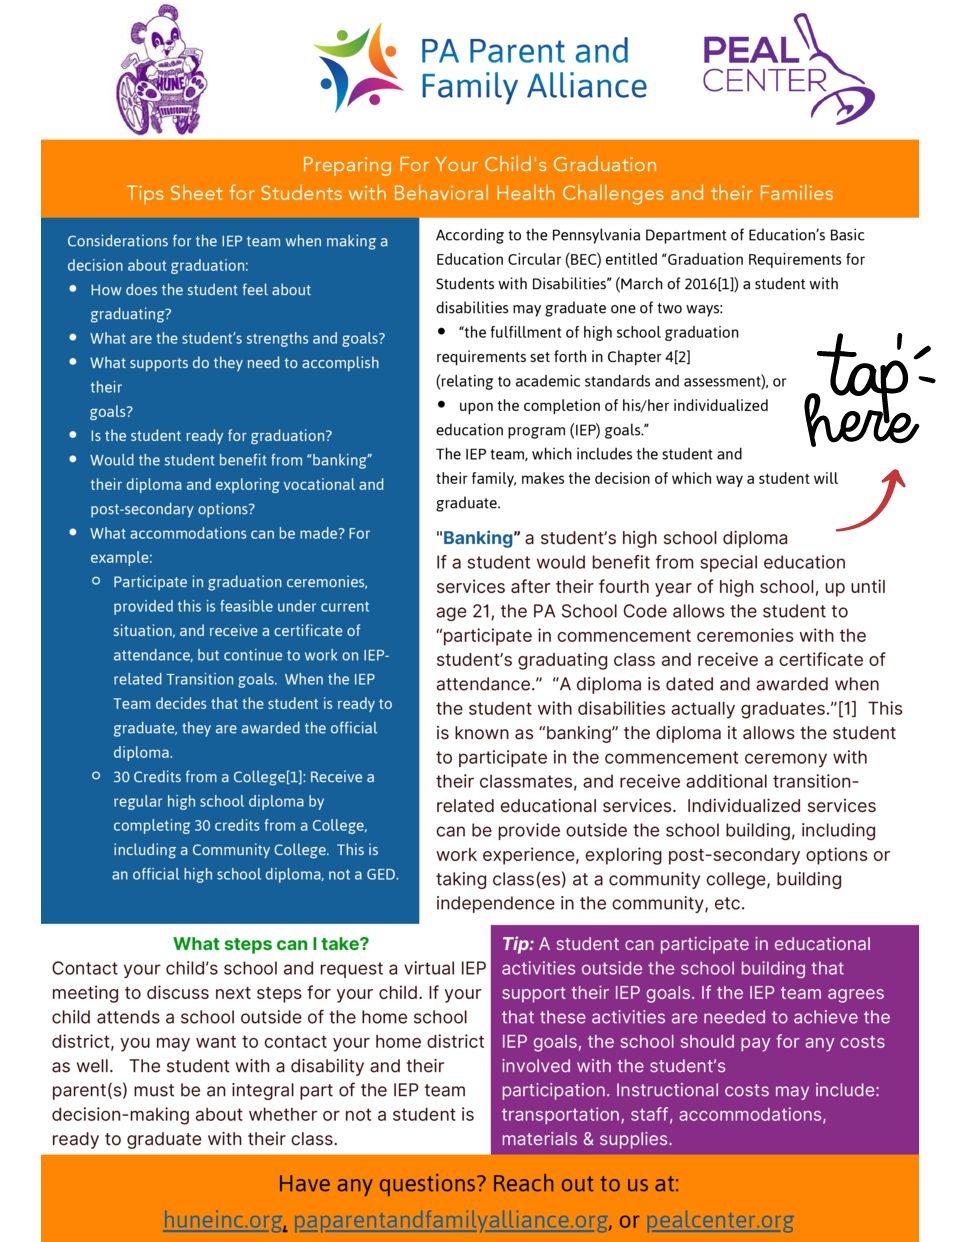 Graduation tip sheet for students with behavioral challenges